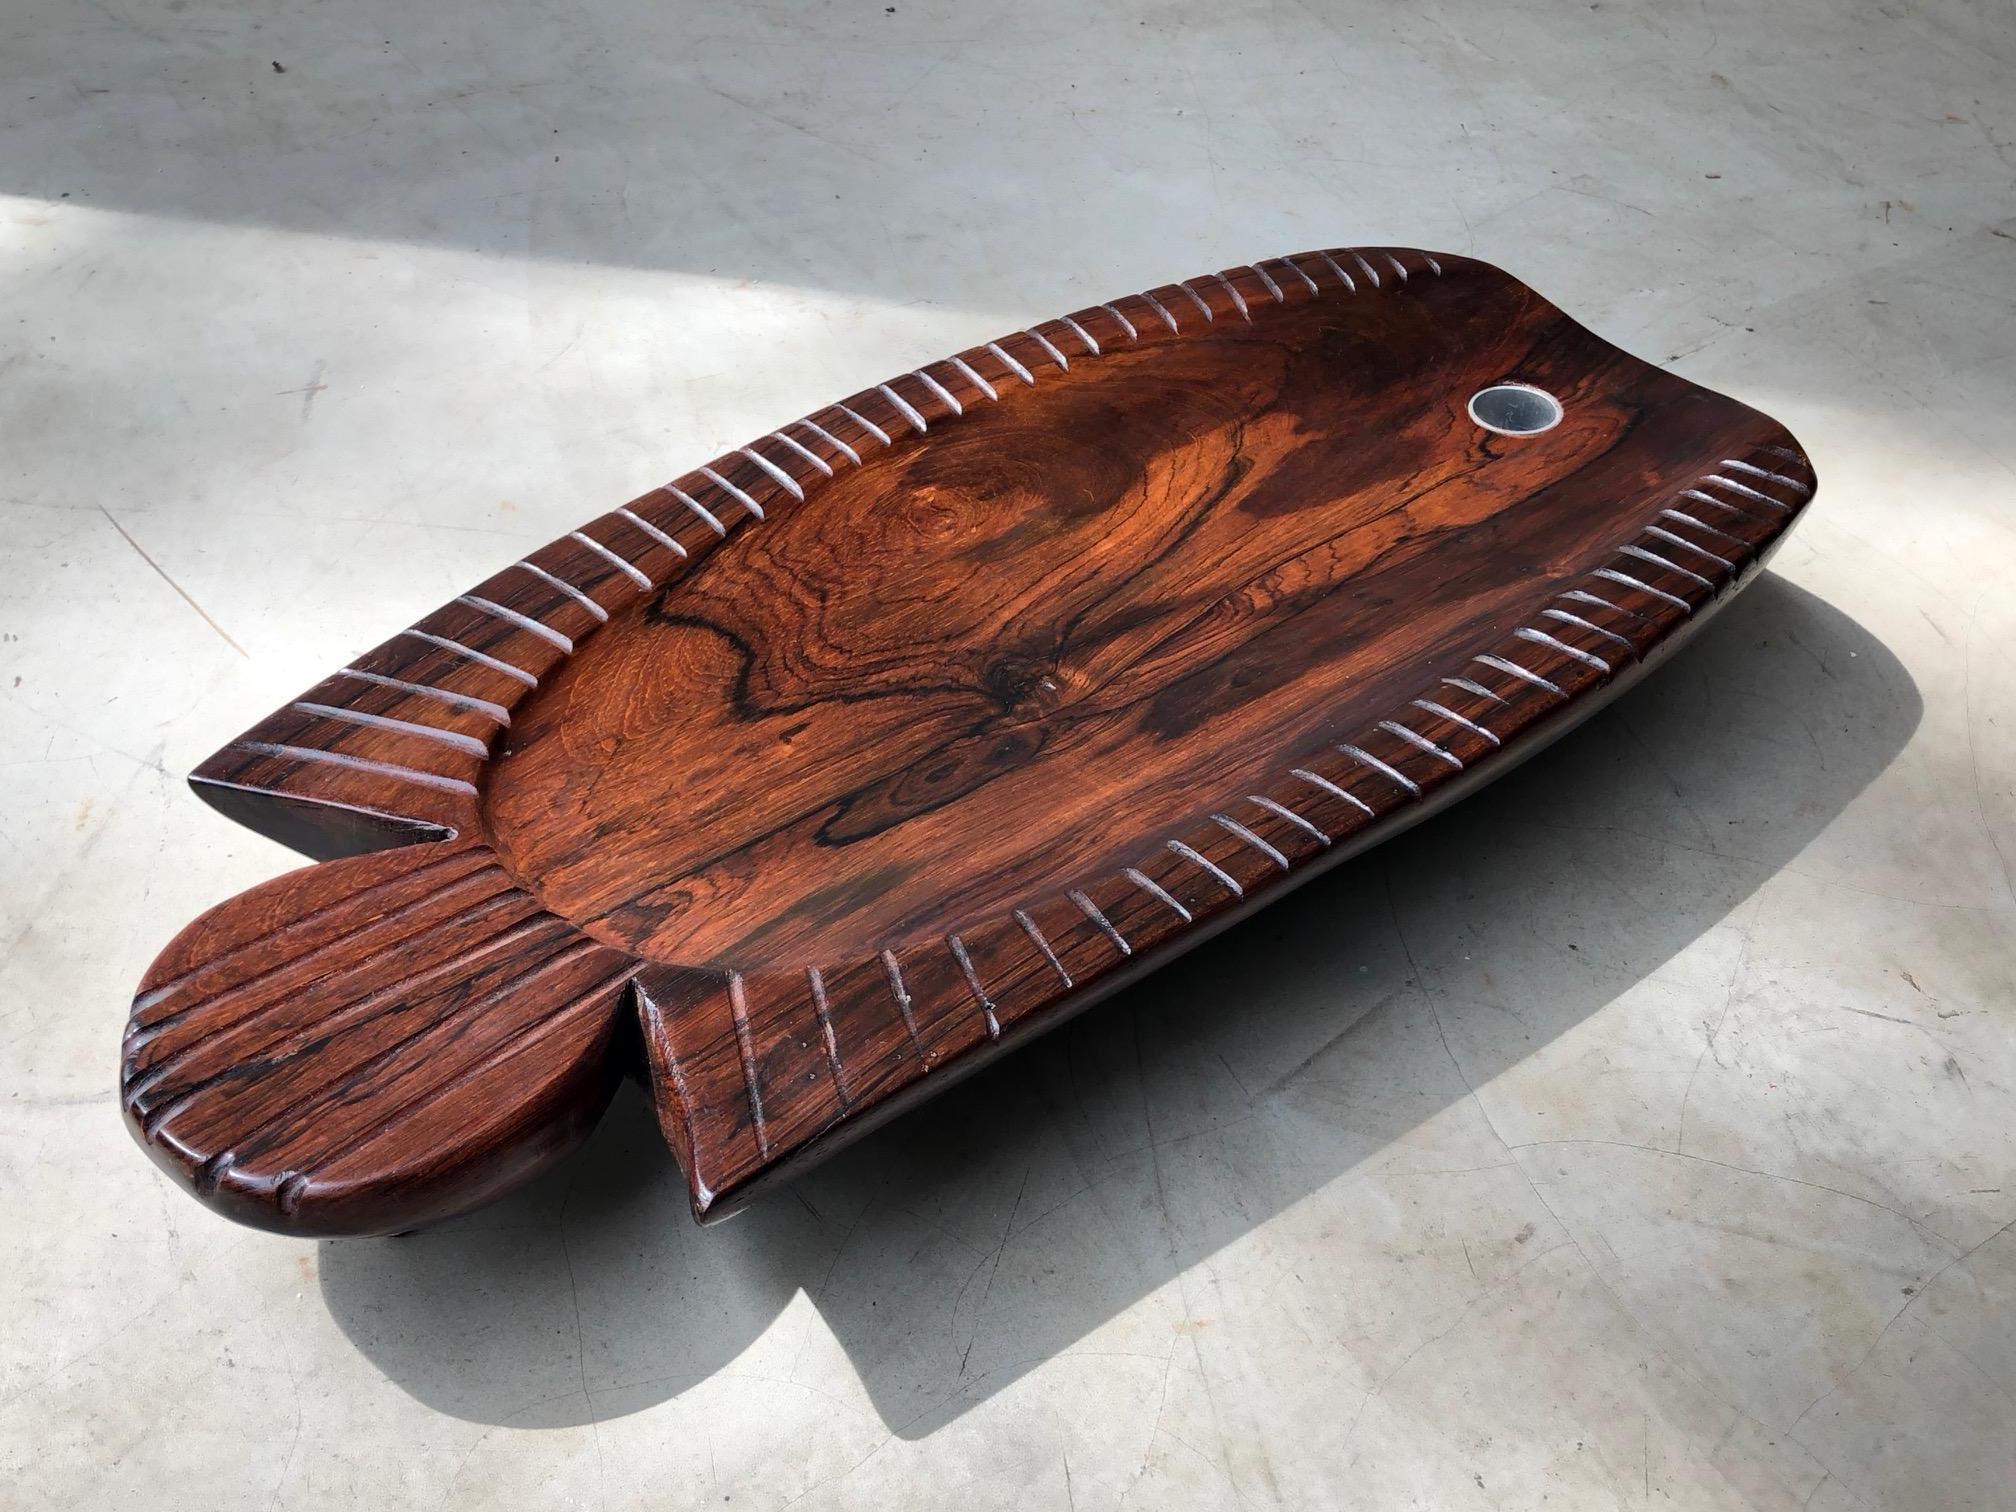 Solid Brazilian rosewood tray, with aluminum details. This peace is a huge vintage tray and also an amazing sculpture of a fish. This is one of a kind work of art that can be used in your everyday life. It is also a beautiful item of decoration,